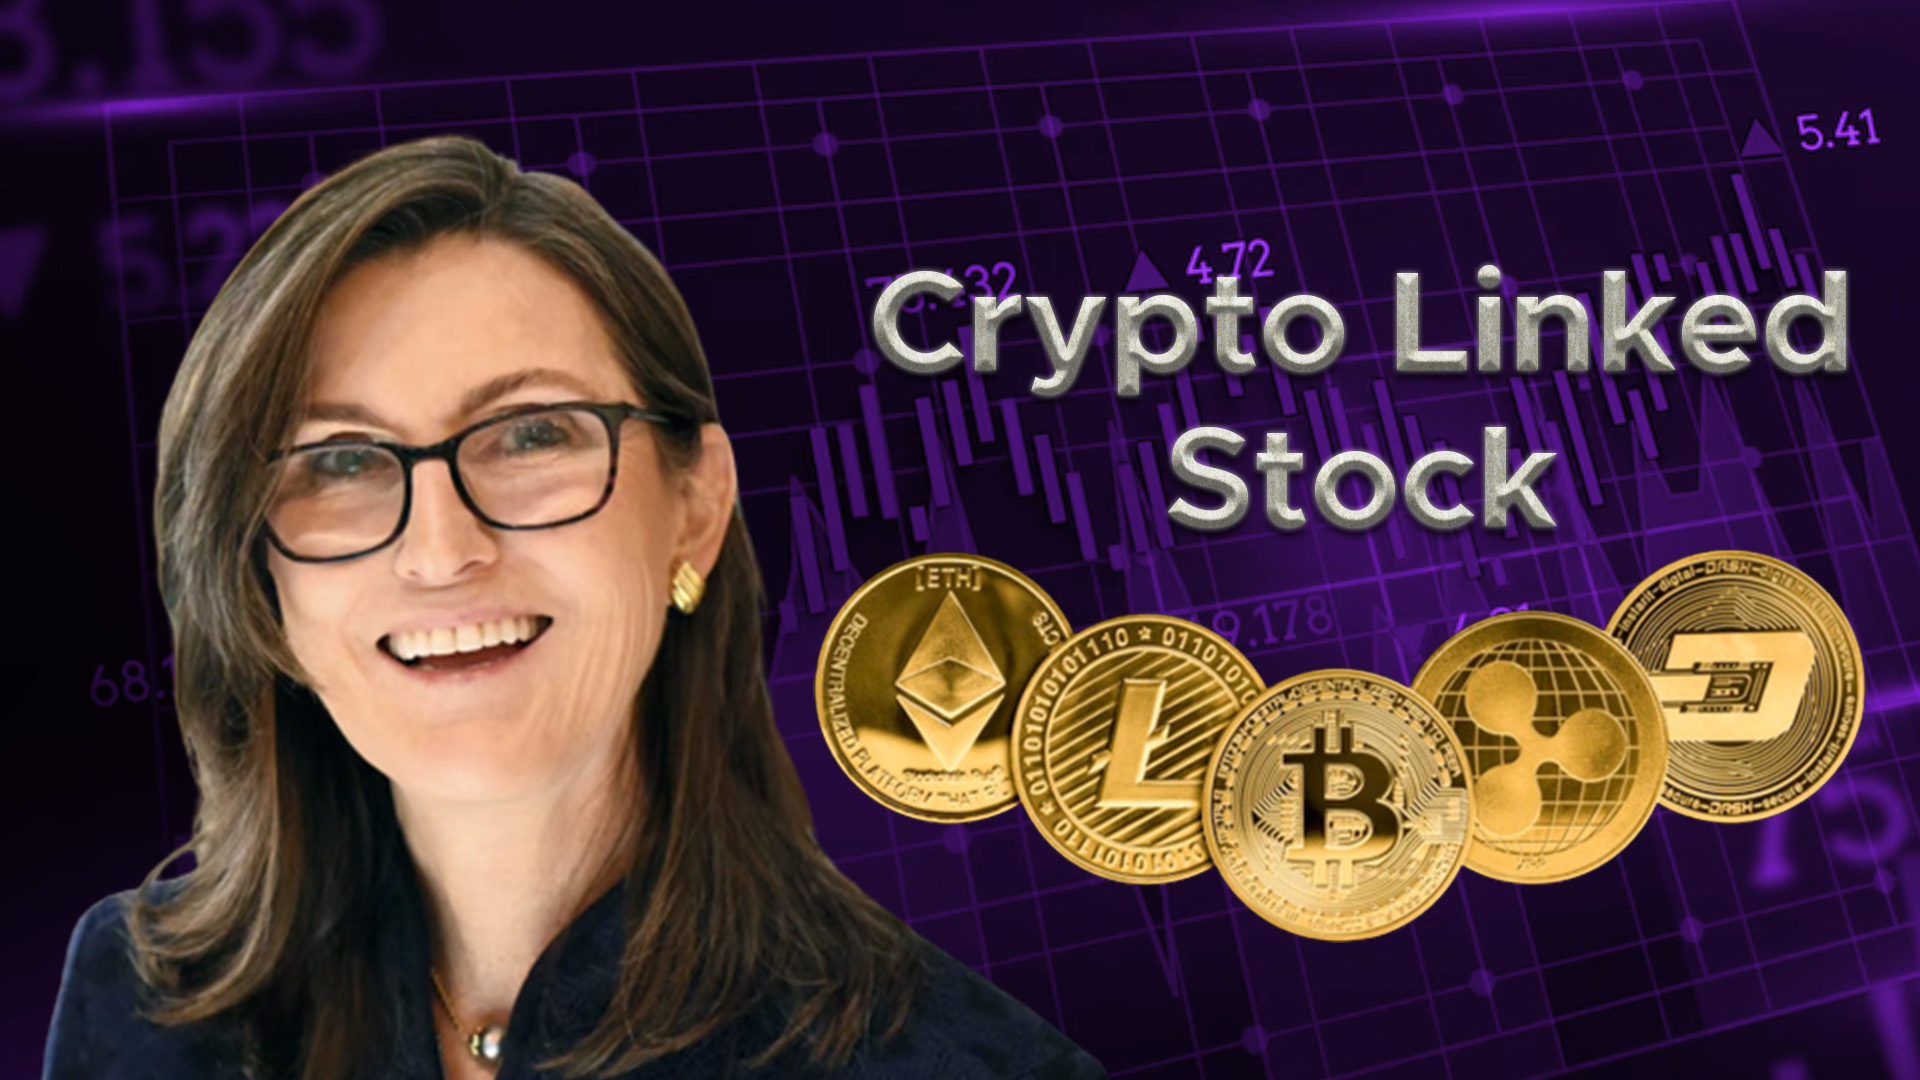 “Cathie wood keeps hoarding this Crypto-linked Stocks:is it buy at current levels?